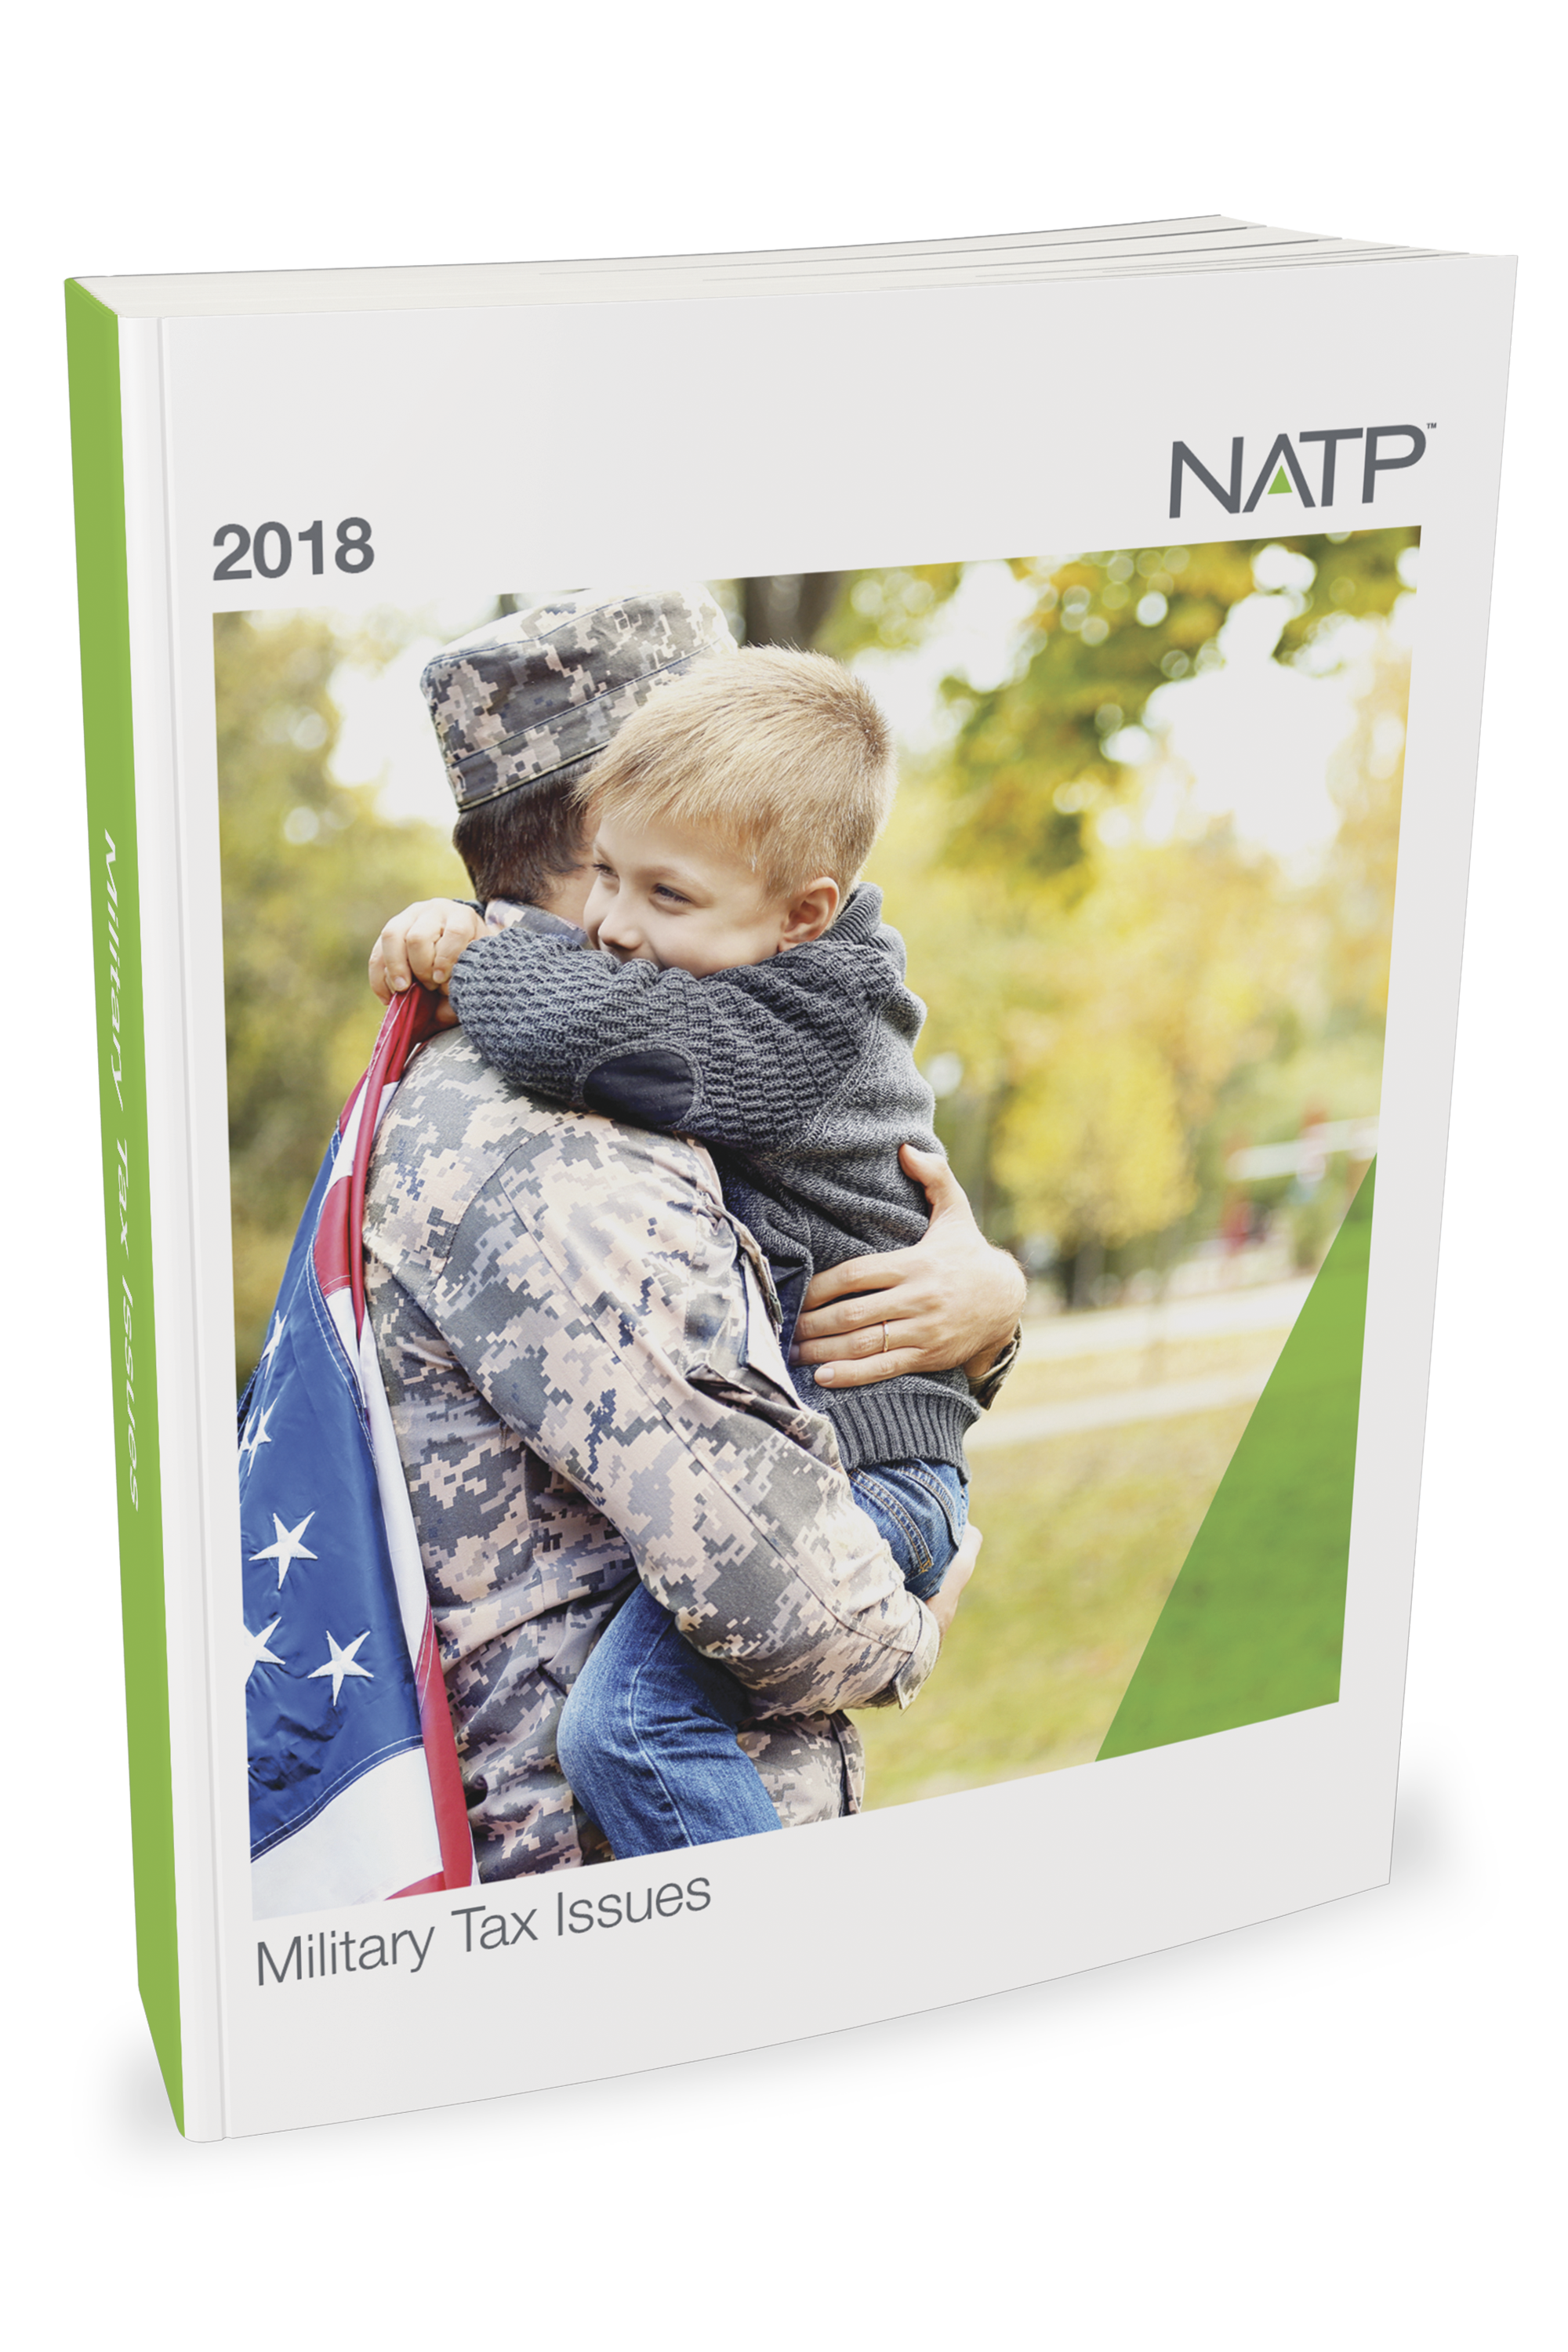 Military Tax Issues Textbook (2018) - #4859 